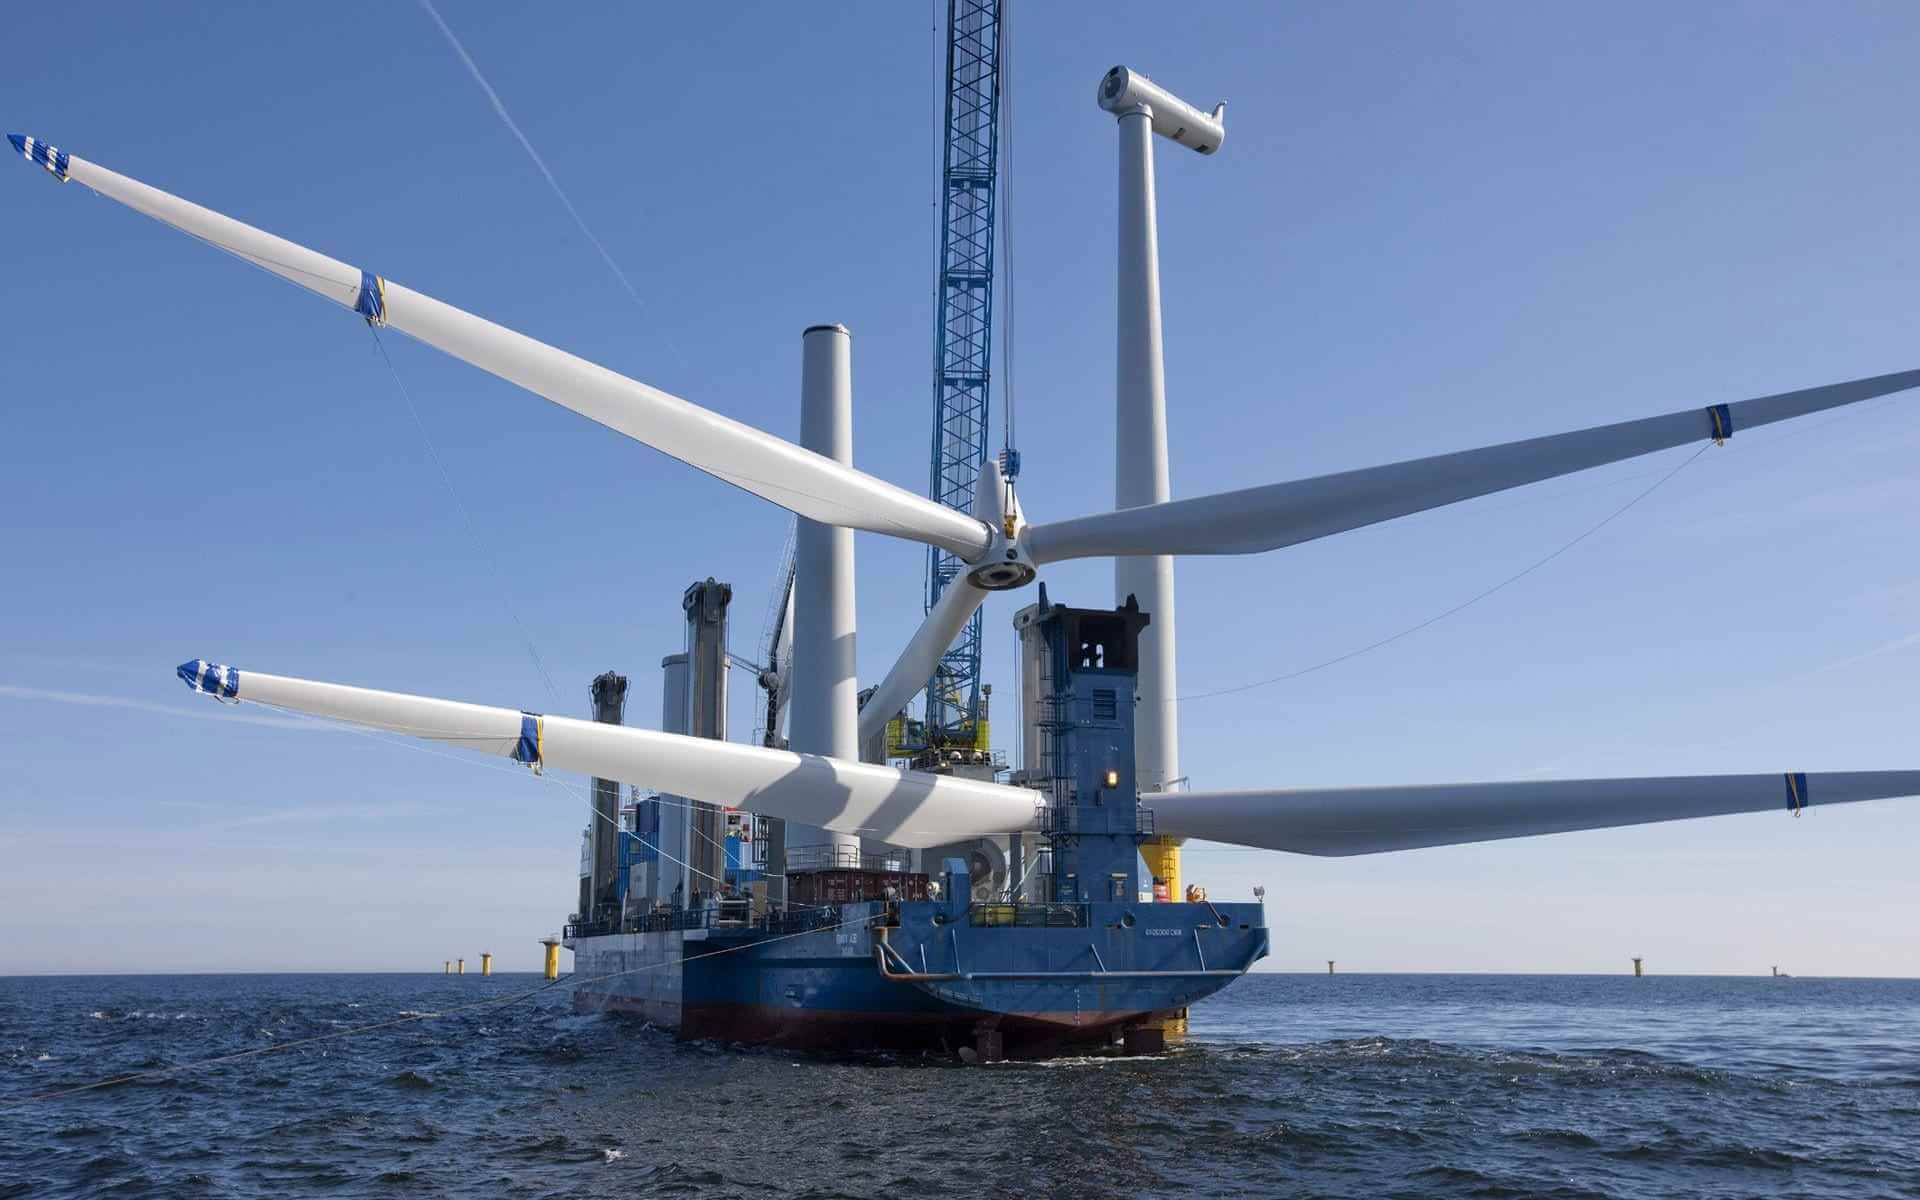 Turbines being constructed from the shipping vessel.